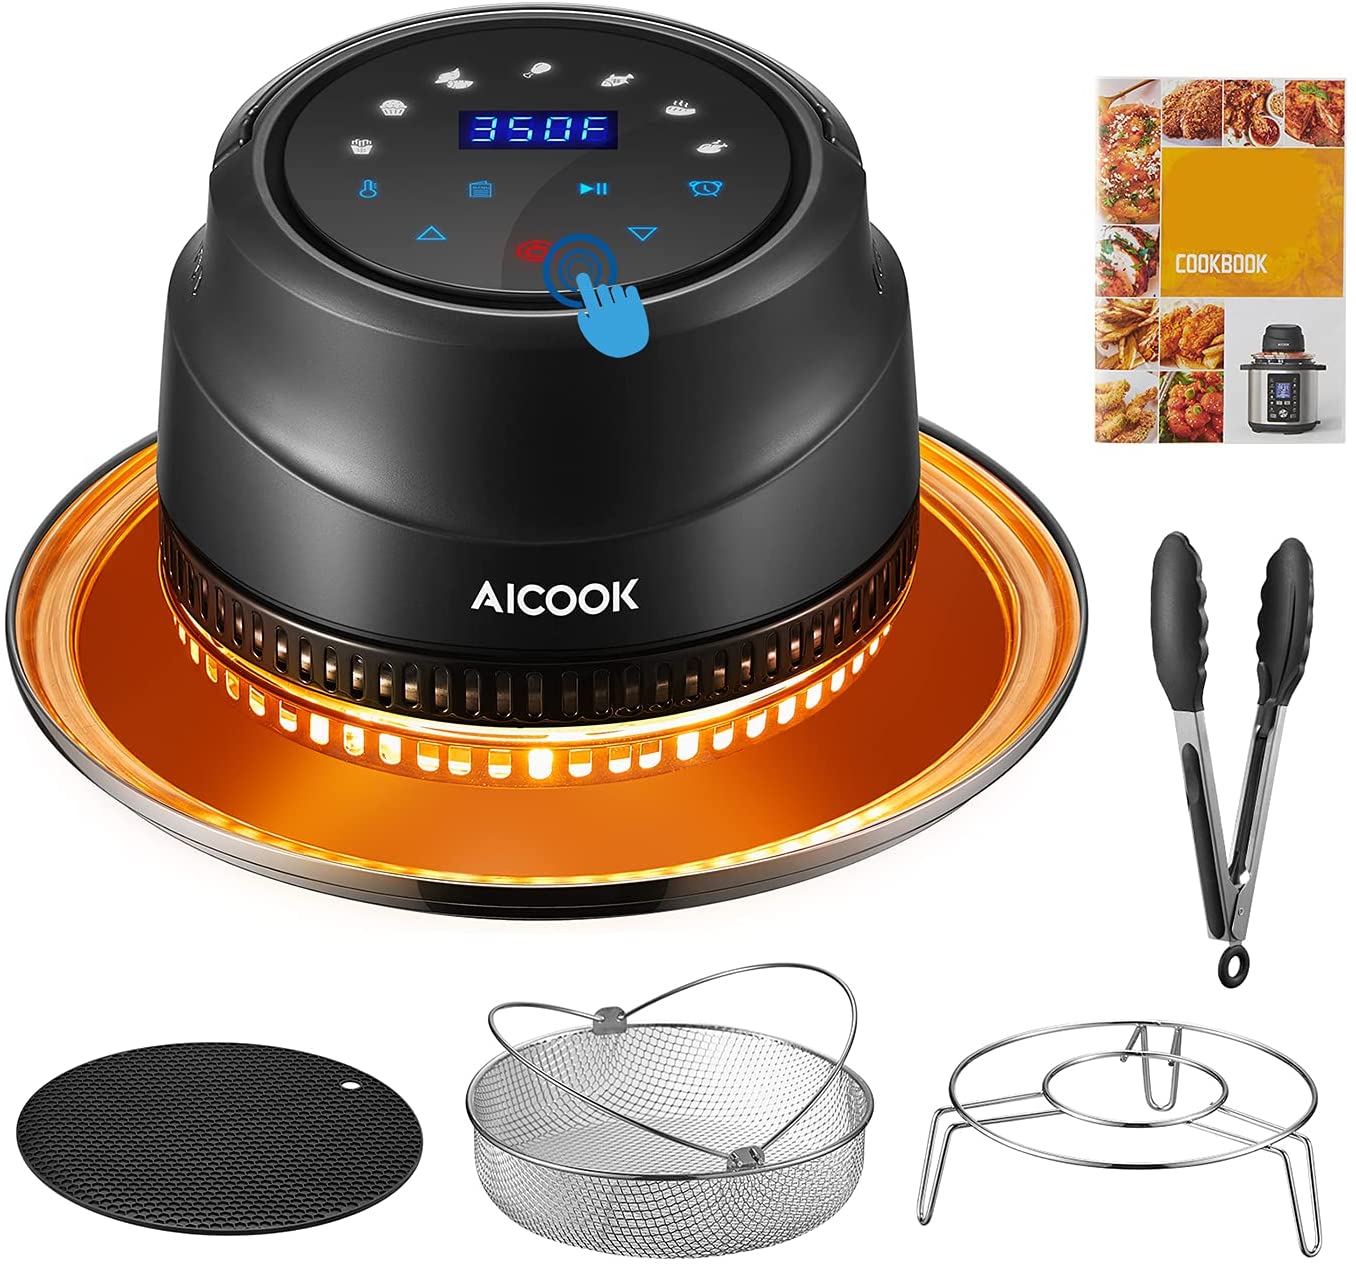 AICOOK | Instant Pot Air Fryer Lid, 7 in 1 Turn Pressure Cooker Into Air Fryer, LED Touchscreen, Accessories and Recipe Included